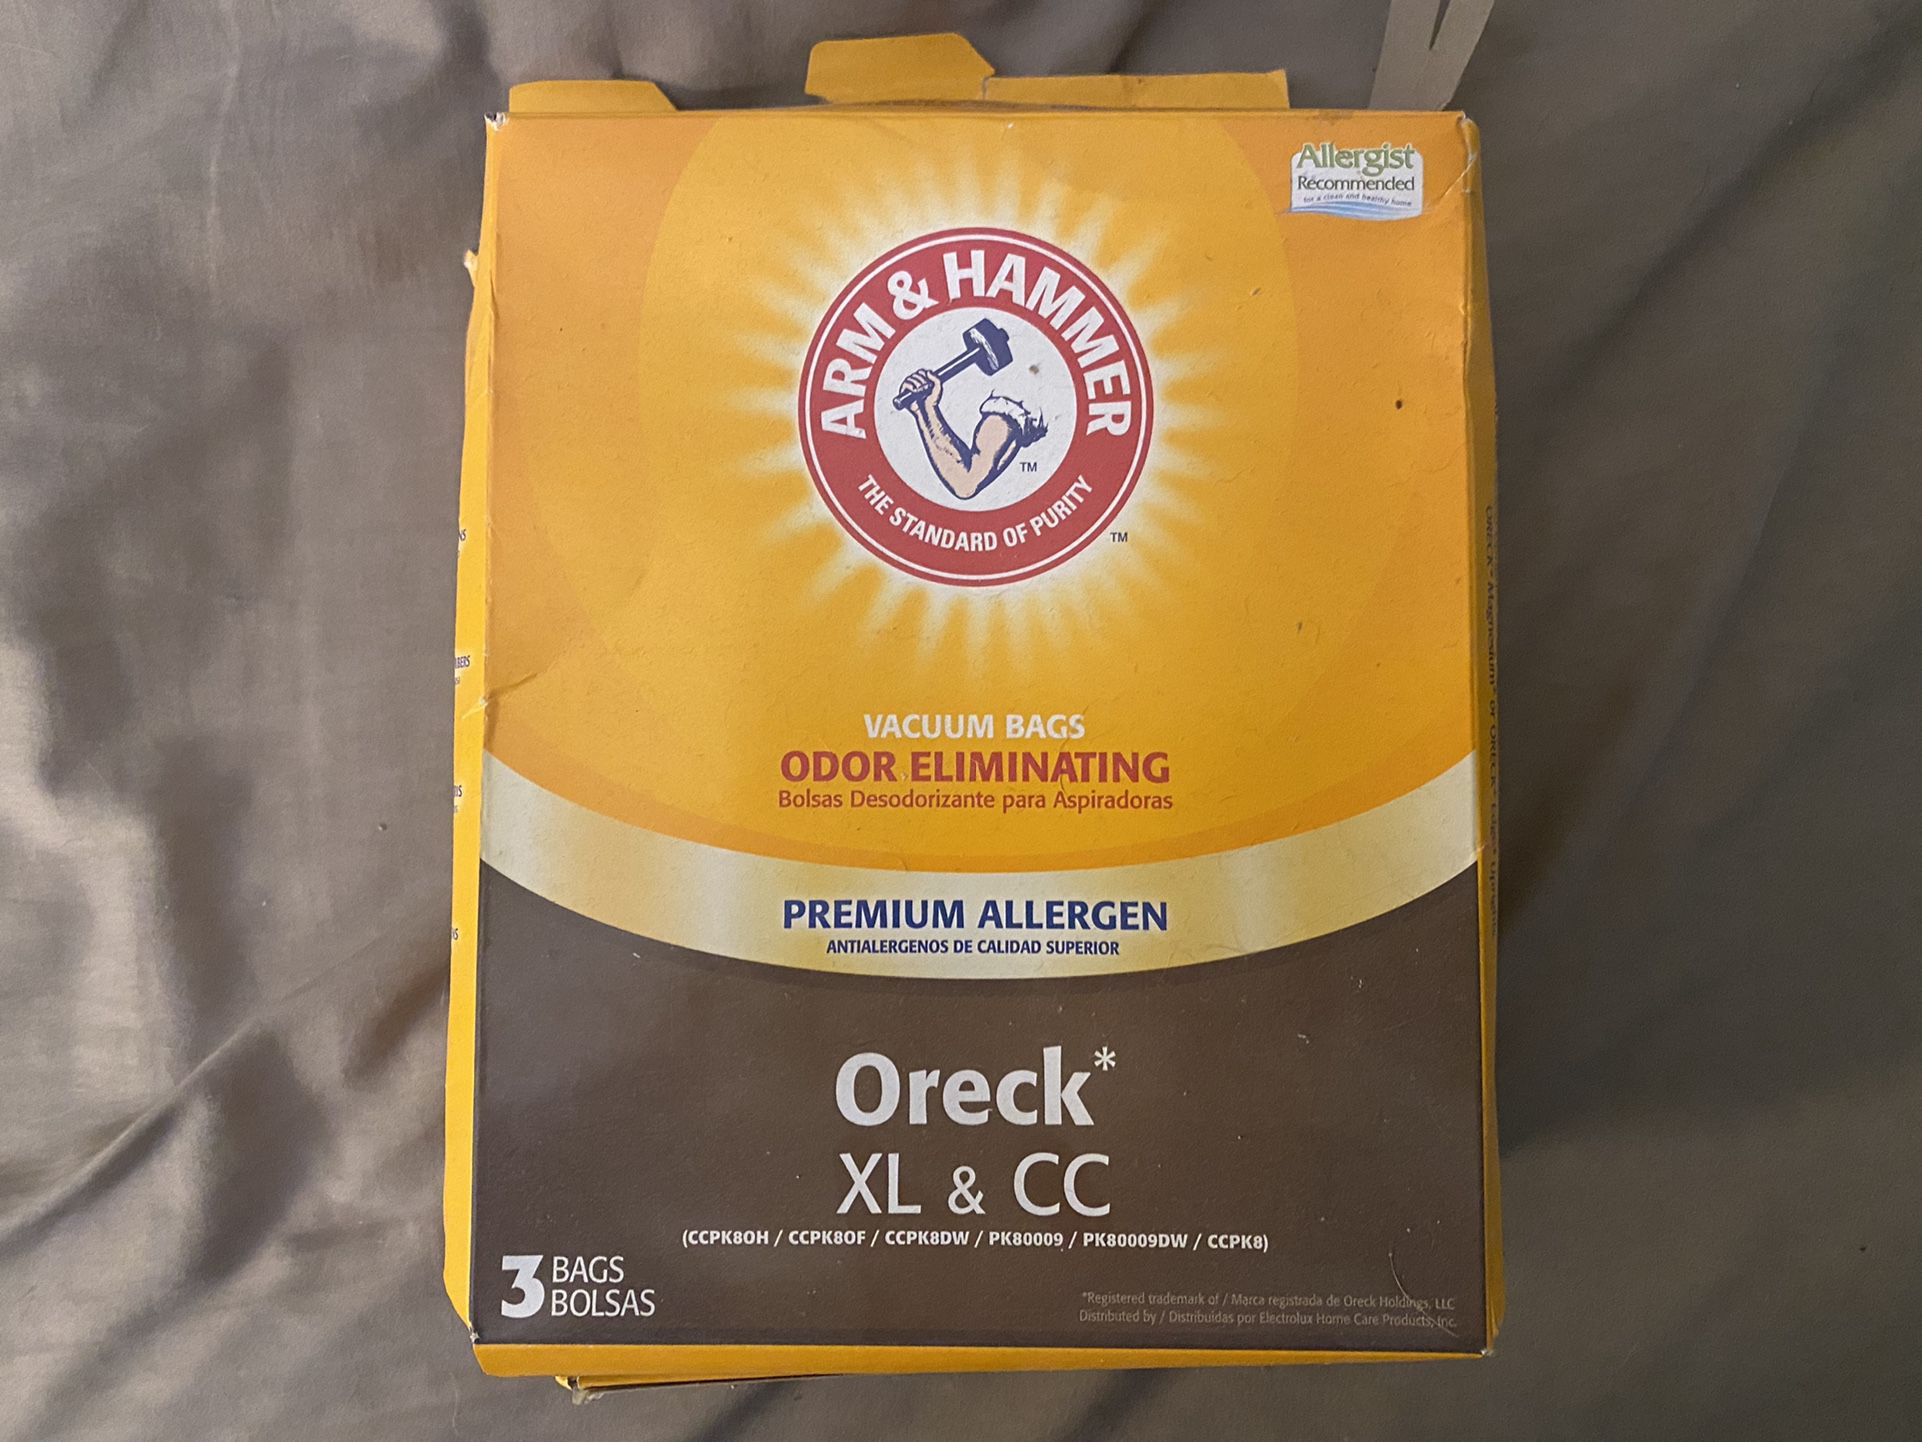 3 Boxes of Large Sized Arm & Hammer Vacuum Bags